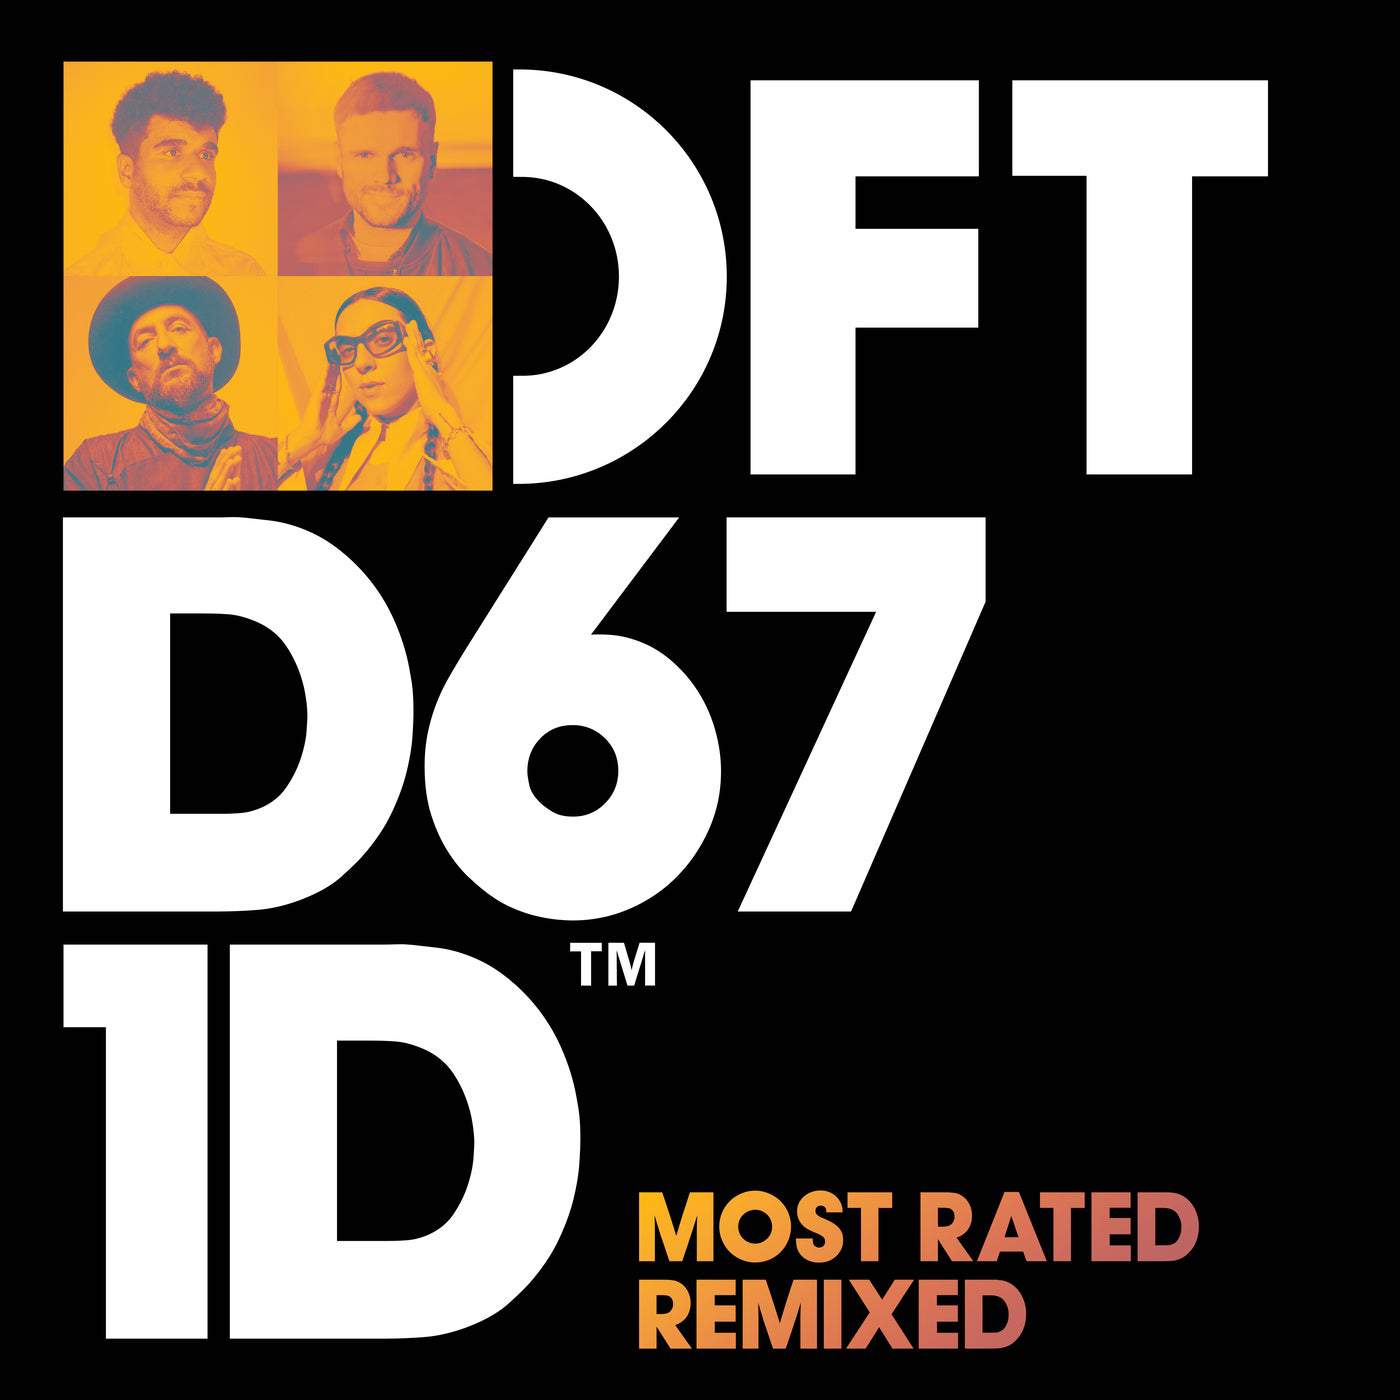 Download Jamie Jones & Tensnake - Most Rated Remixed on Electrobuzz